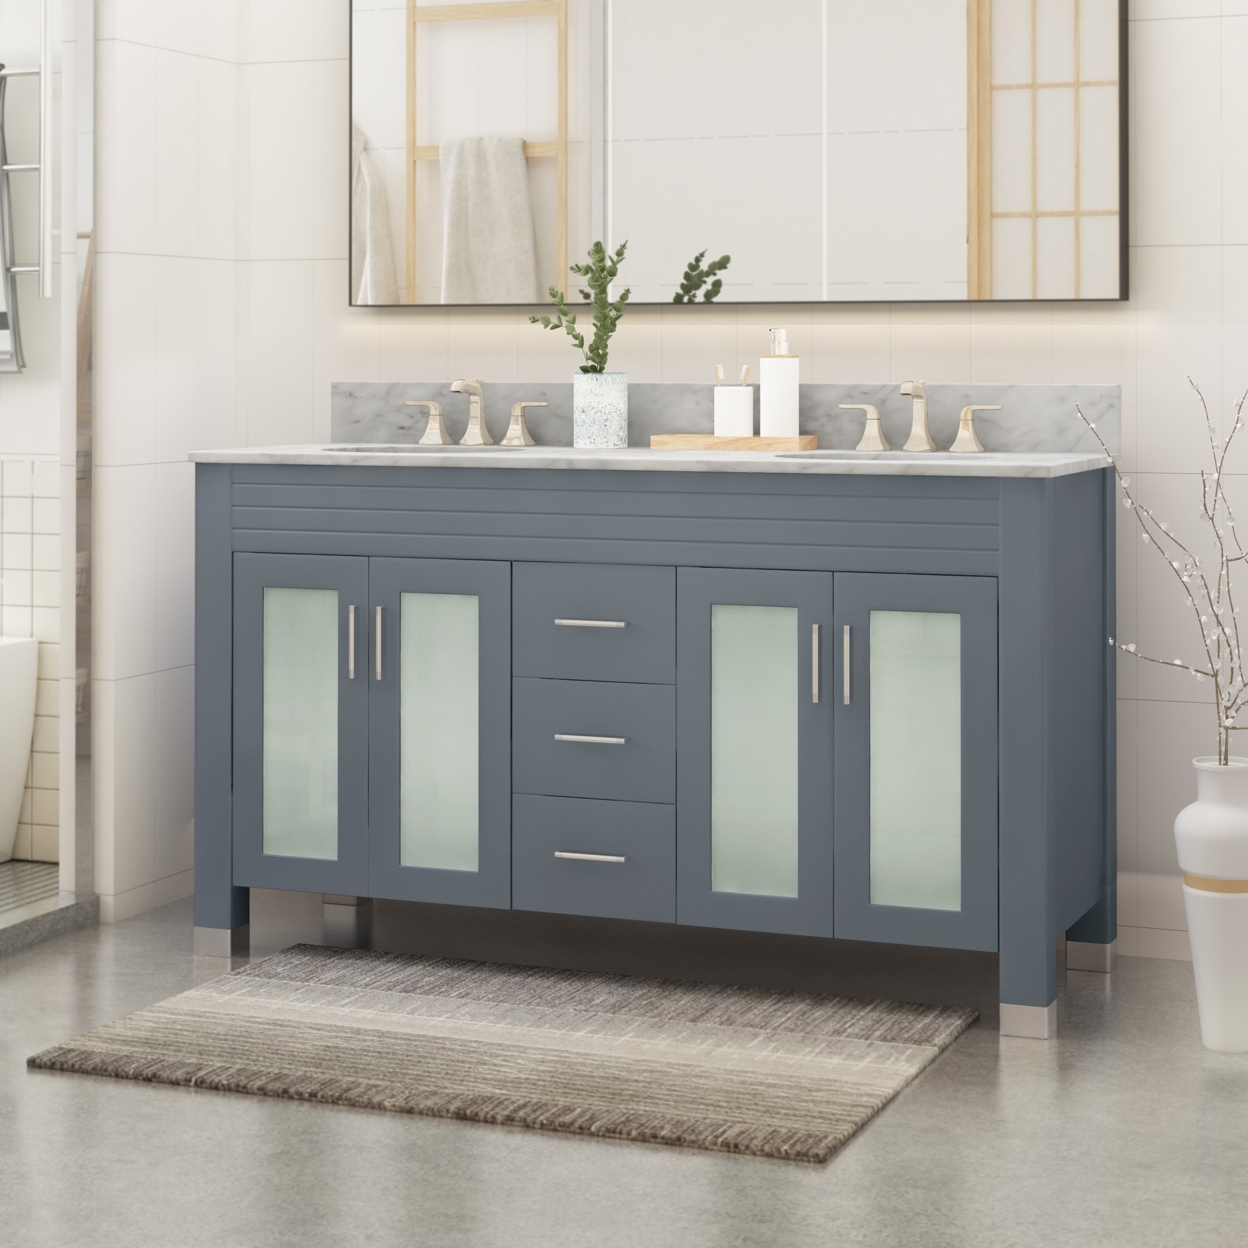 Holdame Contemporary 60 Wood Bathroom Vanity (Counter Top Not Included) - White